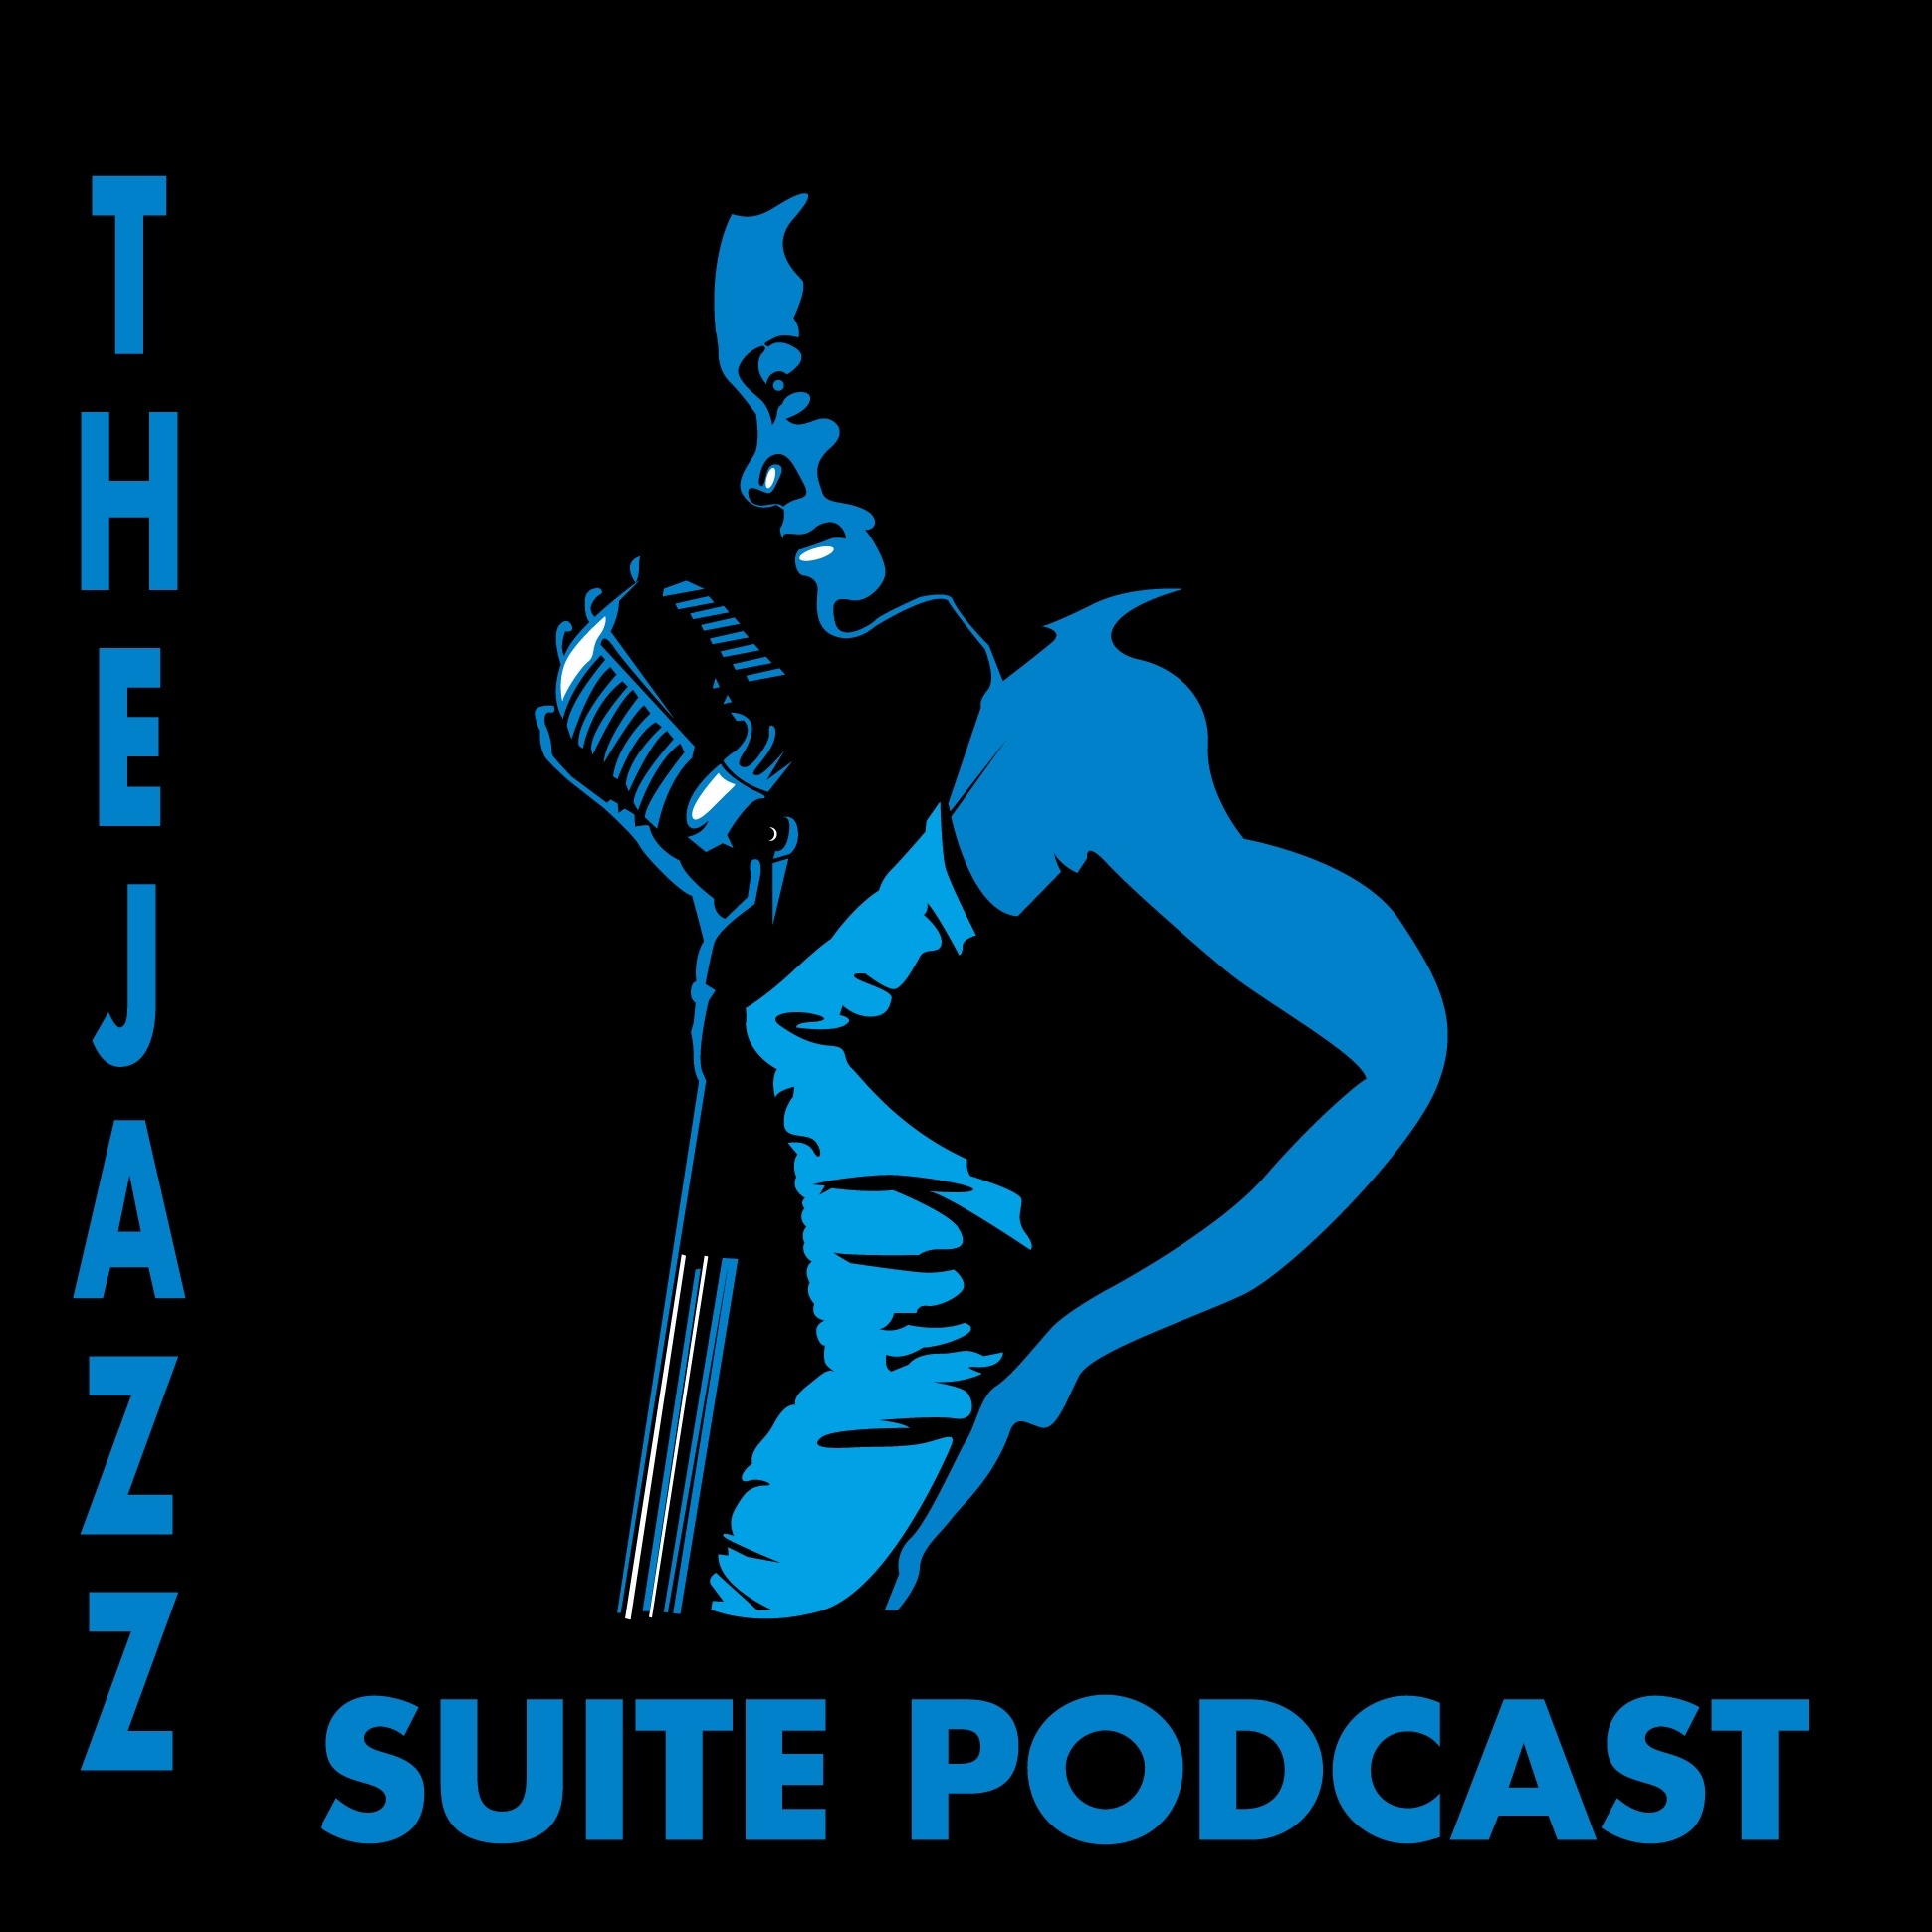 The Jazz Suite Podcast Show #455